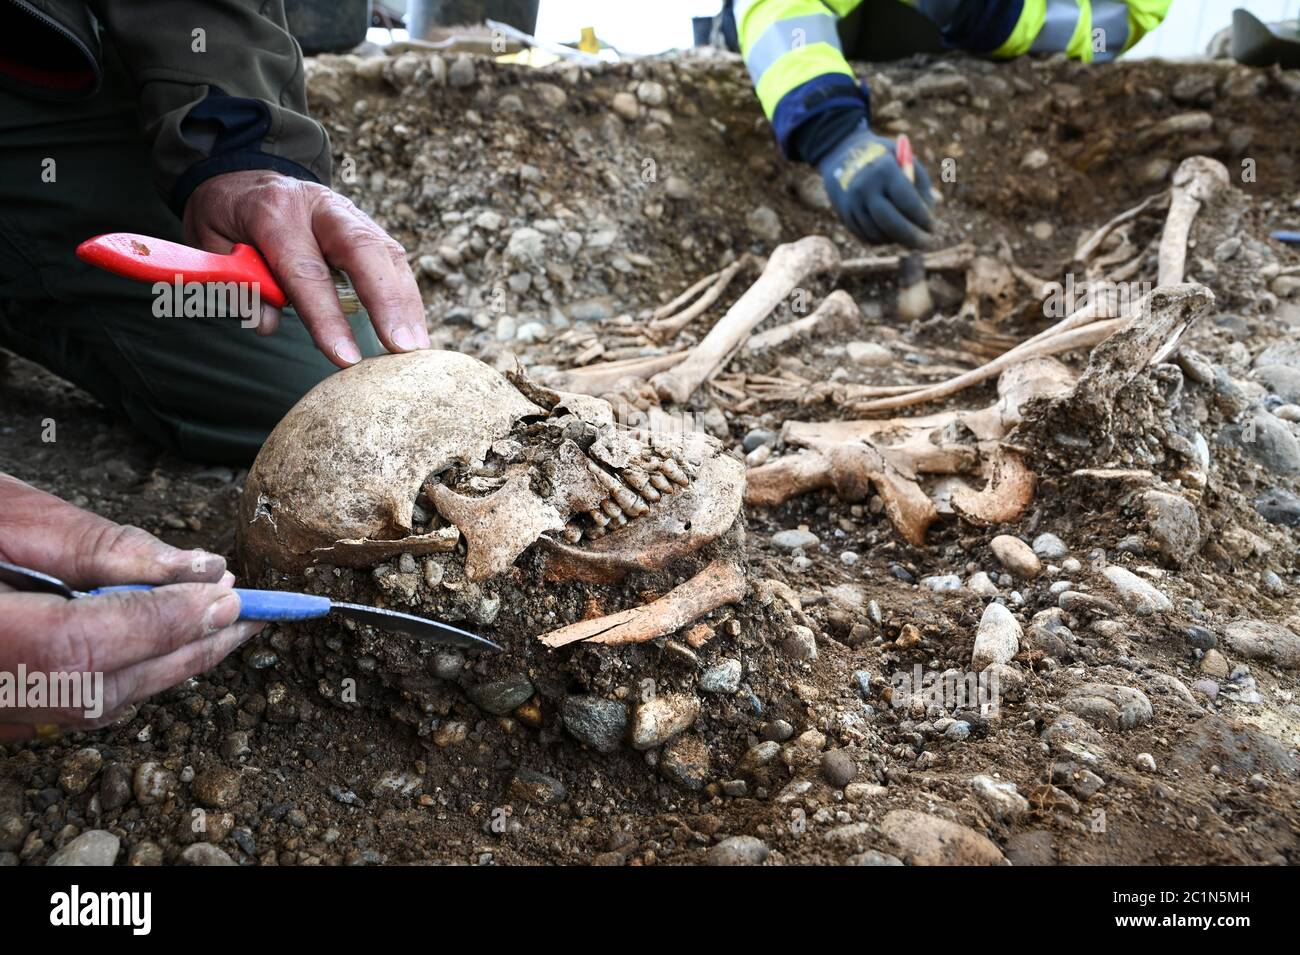 Allensbach, Germany. 04th June, 2020. District archaeologist and excavation director Jürgen Hald (l) and excavation technician Rebecca Letzing excavate parts of skeletons at the historical execution site not far from the Gnadensee (part of Lake Constance). Archaeologists have found the remains of a gallows, several skeletons and cremation pits there. (to dpa: 'Death on the gallows - archaeologists discover execution site at Lake Constance') Credit: Felix Kästle/dpa/Alamy Live News Stock Photo